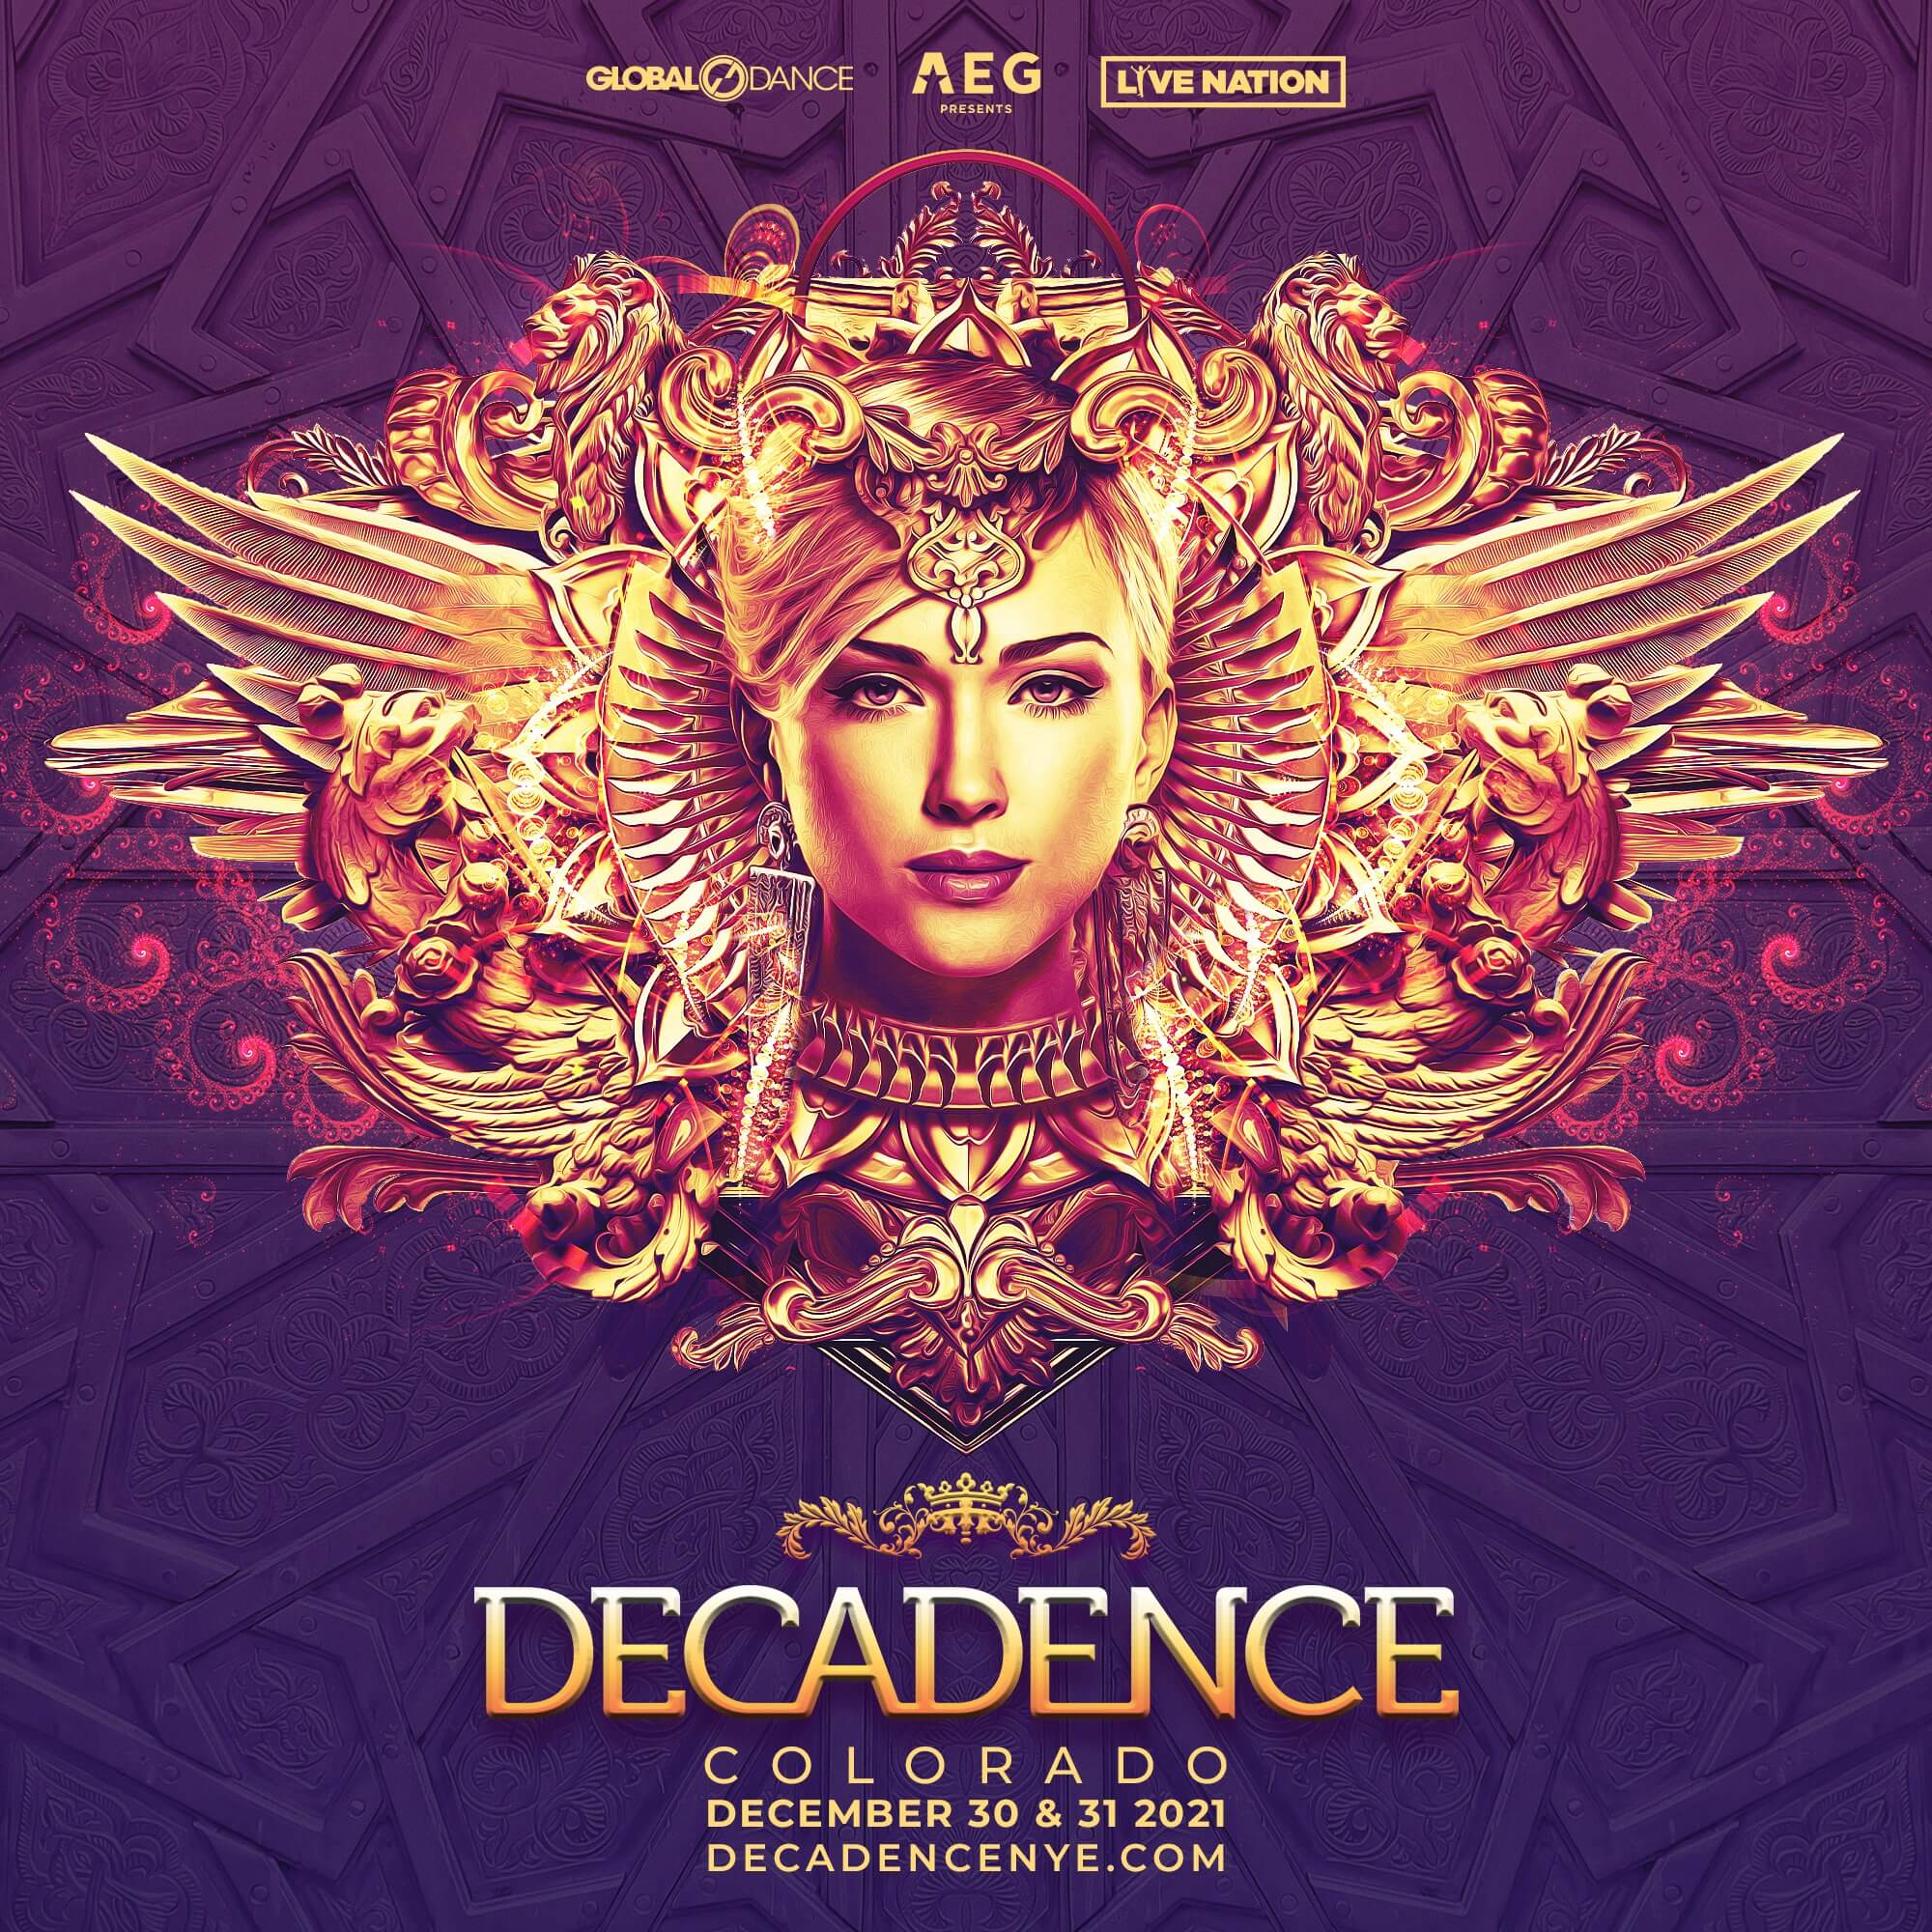 Decadence Colorado 2021 Lineup – See It Here!